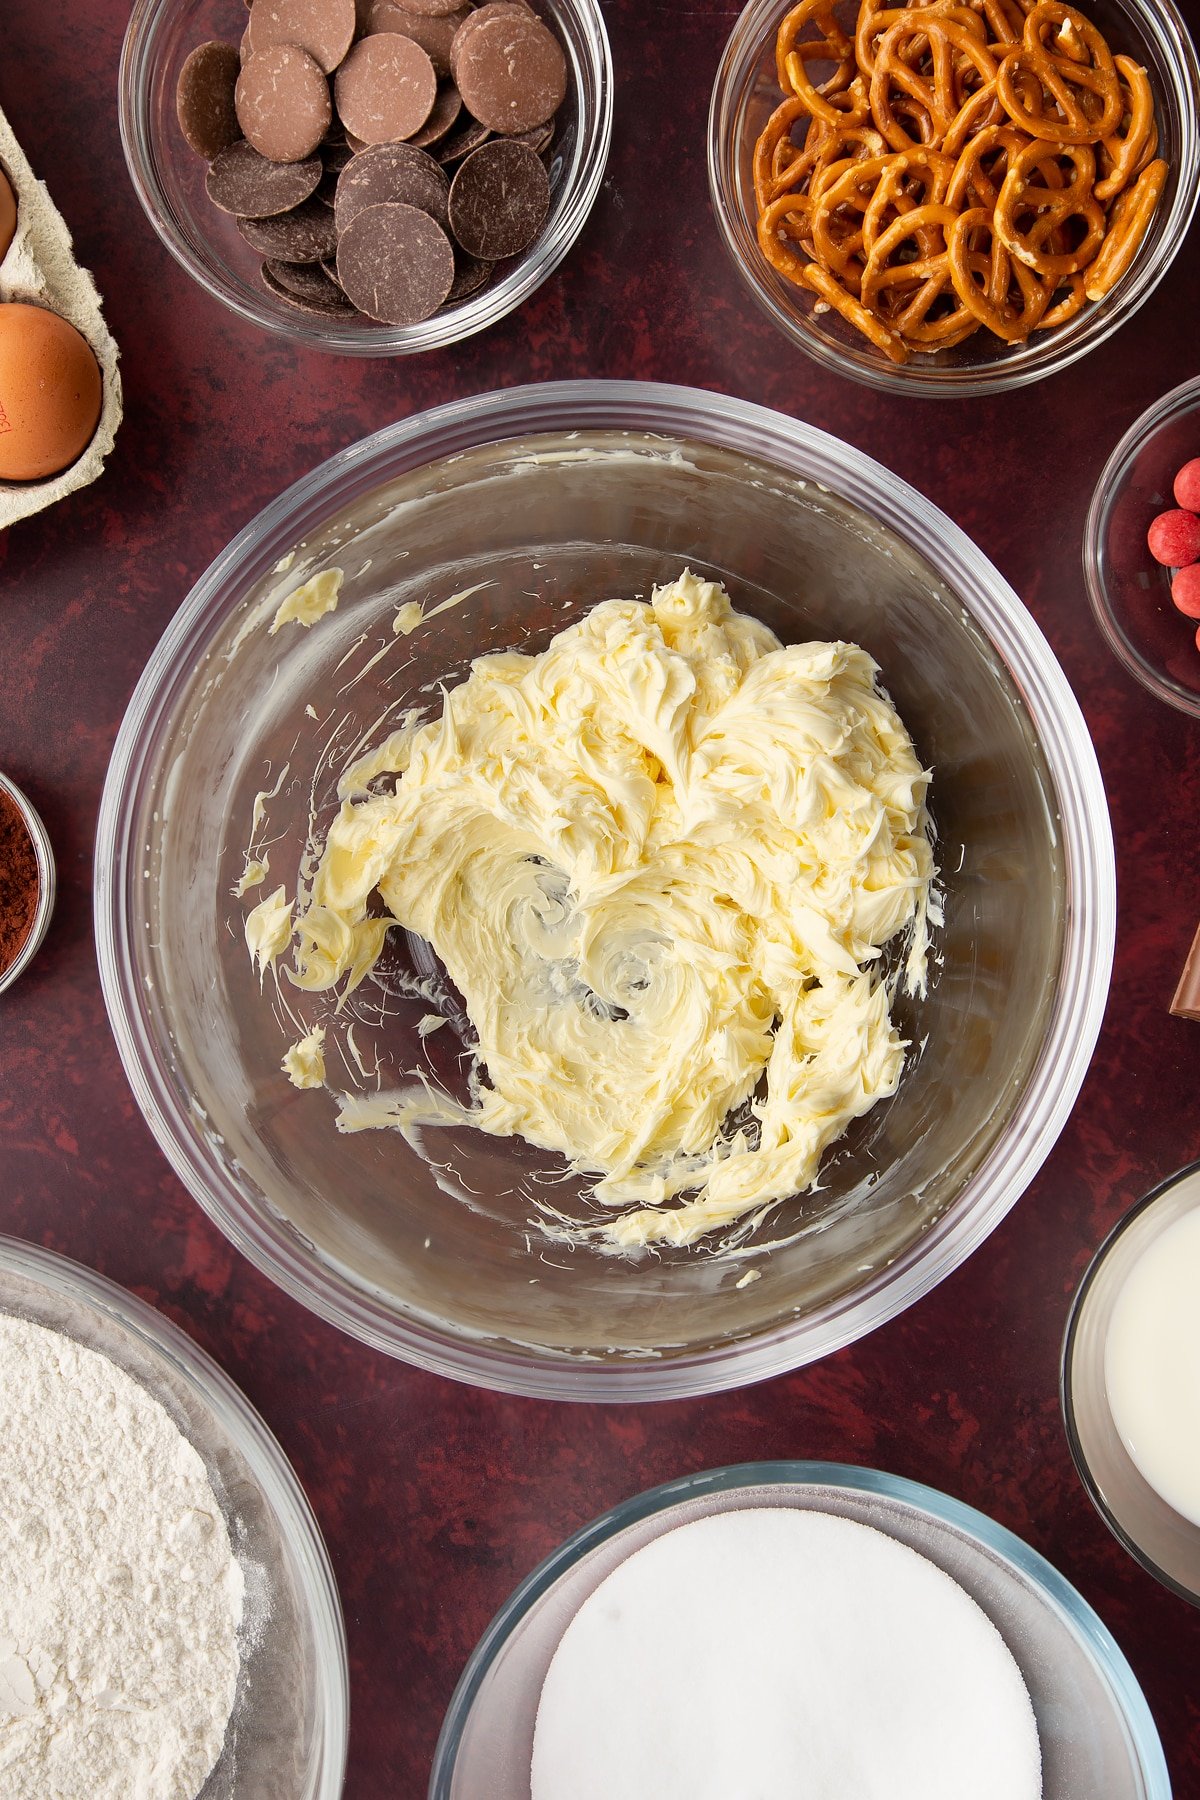 Whipped softened butter in a mixing bowl. Ingredients to make reindeer cupcakes surround the bowl.